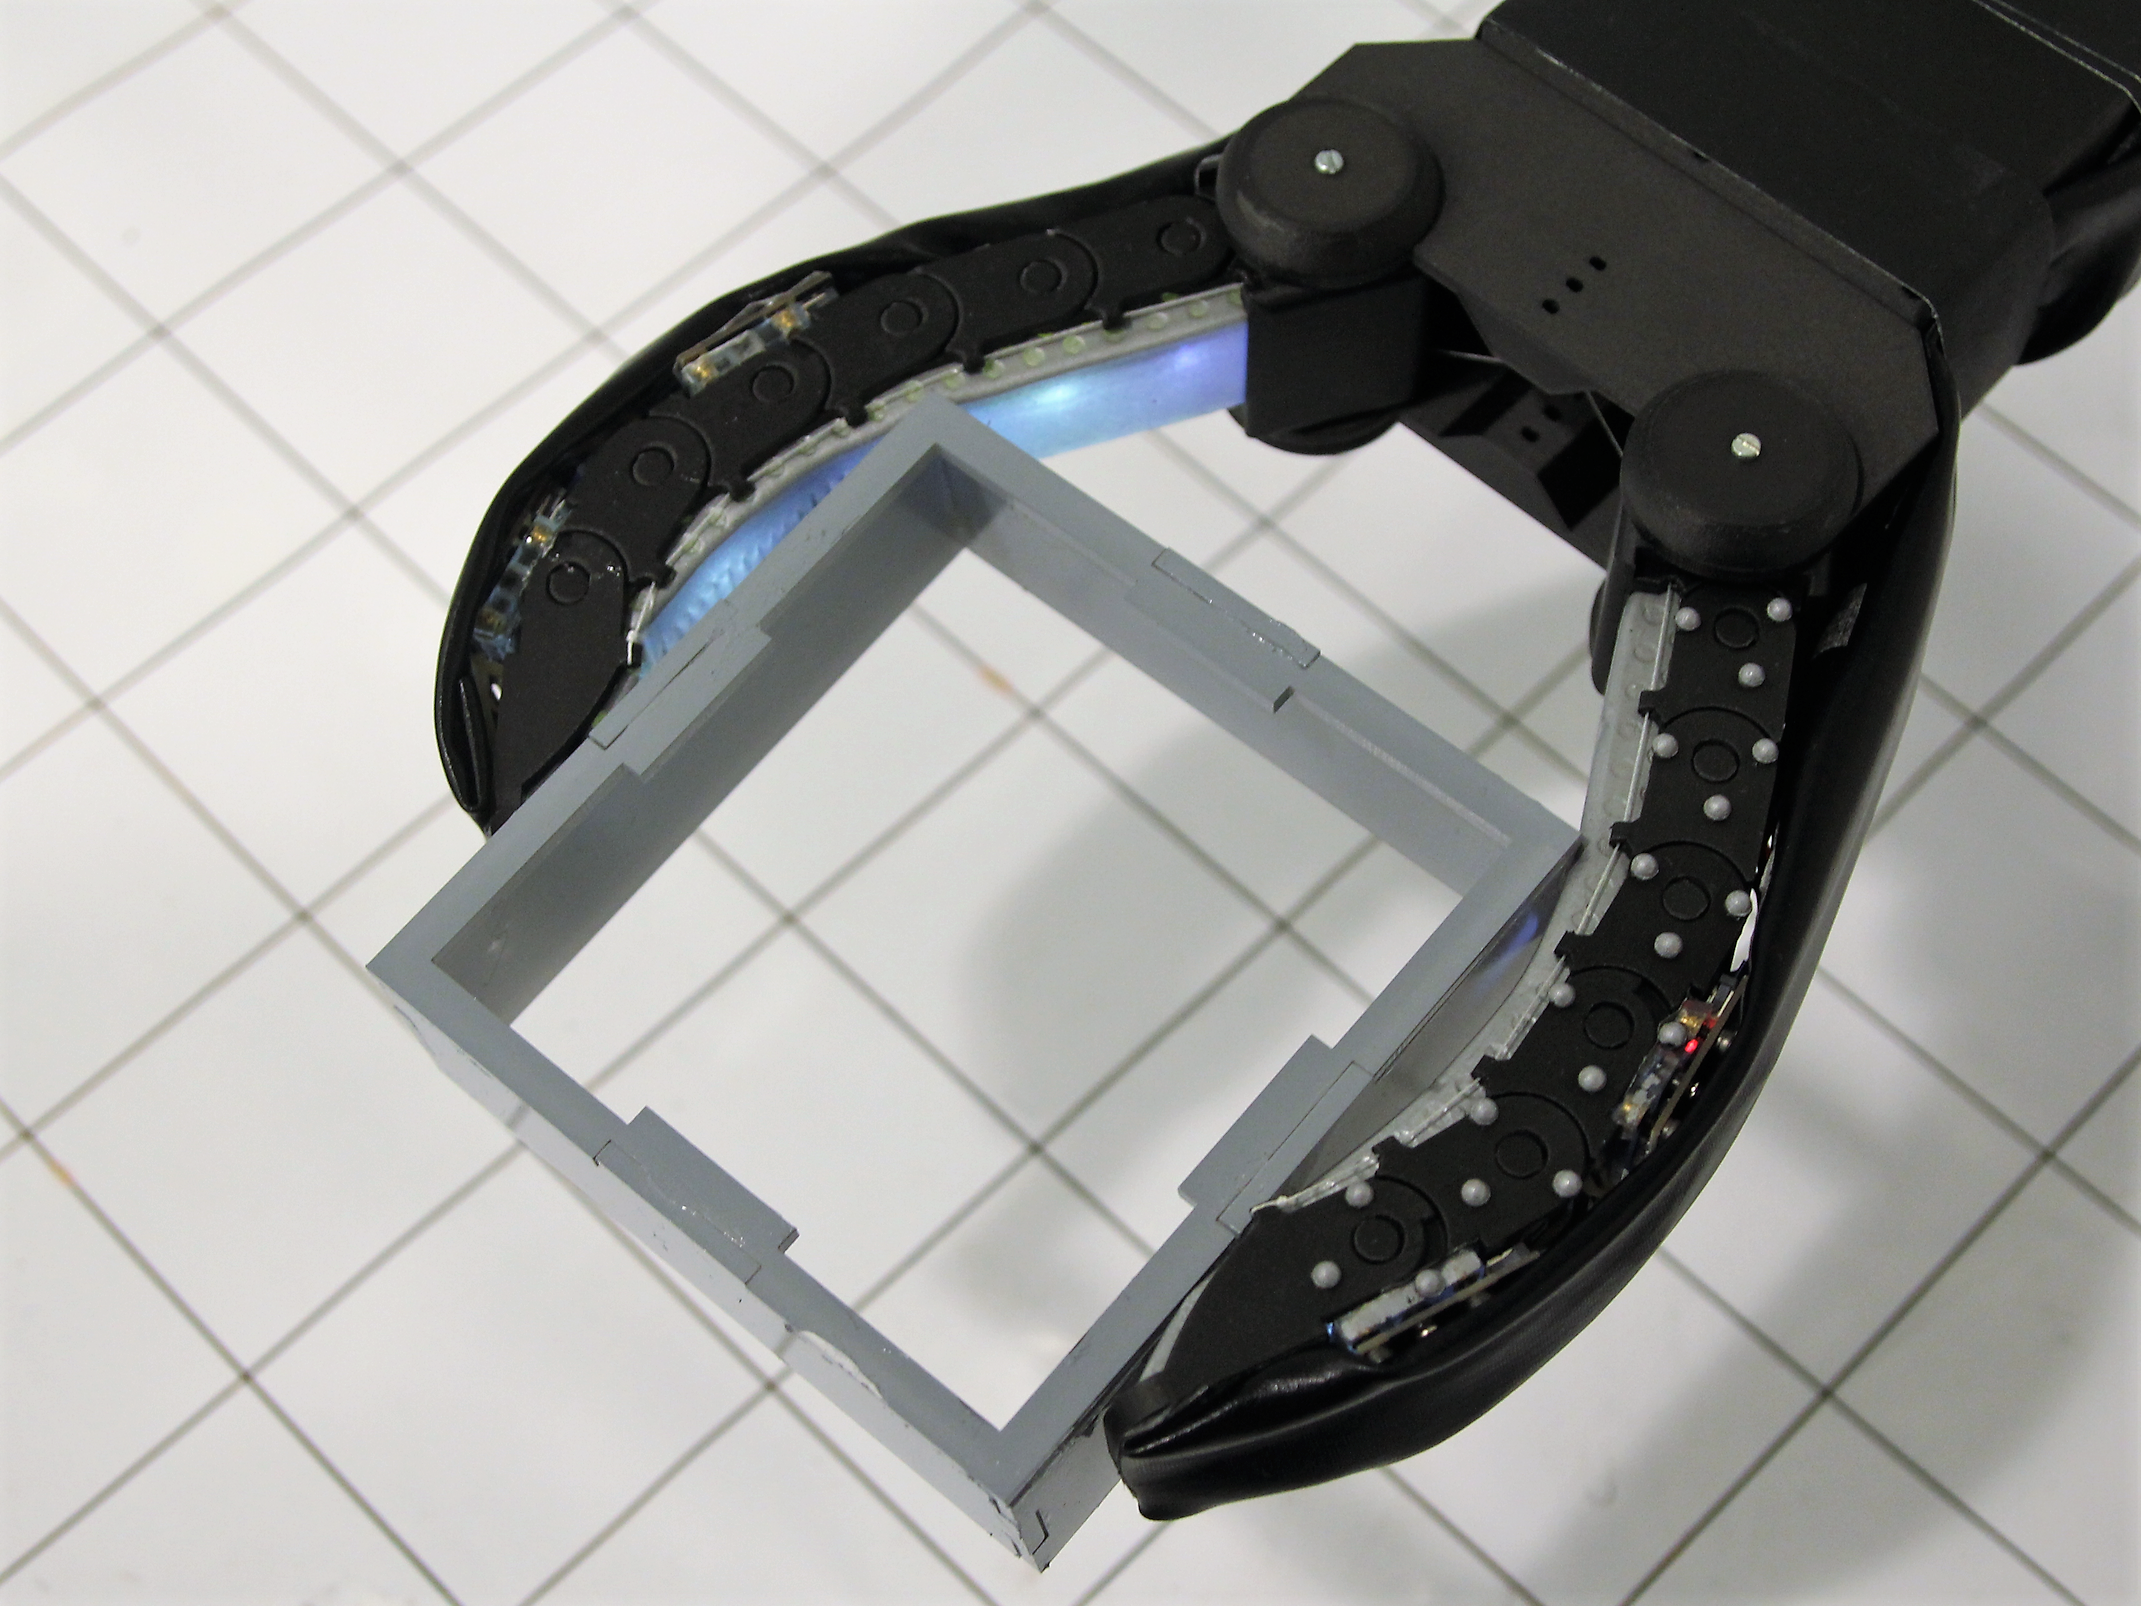 The robot hand uses squishy and flexible materials to delicately grip glass